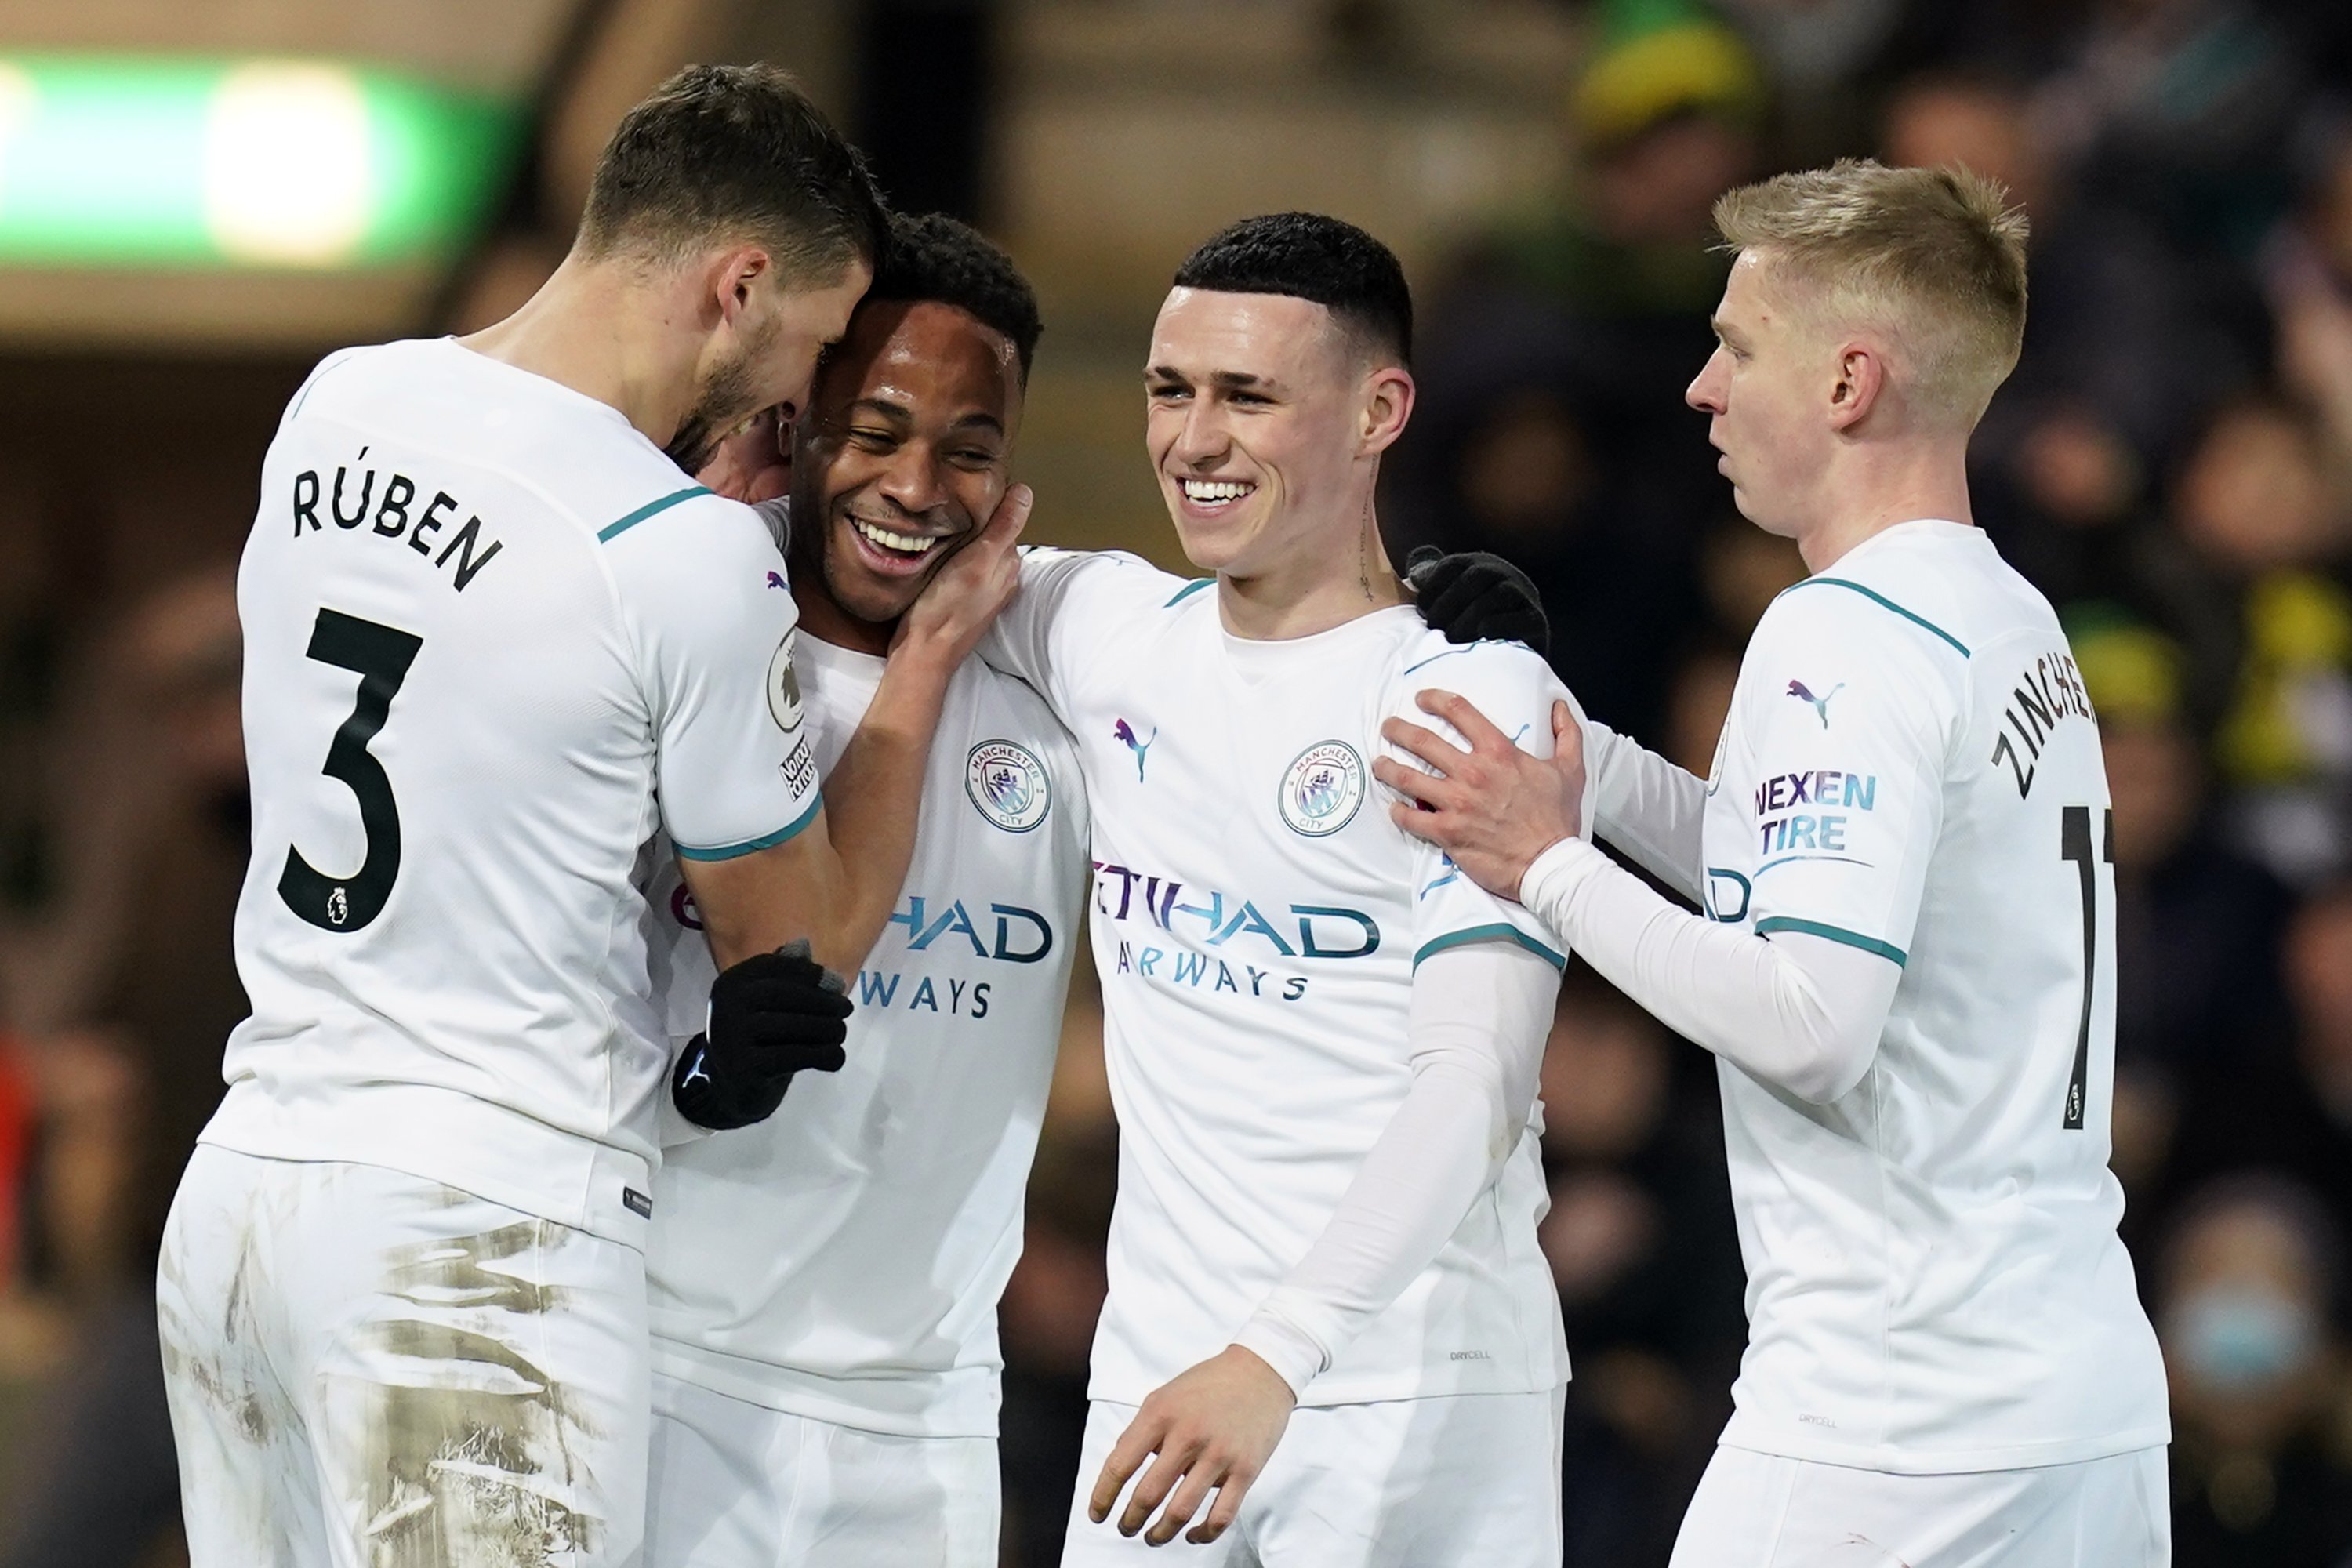 Manchester City's Raheem Sterling (2nd L) is congratulated by (From L to R) teammates Ruben Dias, Phil Foden and Oleksandr Zinchenko after scoring in a Premier League game against Norwich City, Norwich, England, Feb. 12, 2022. (EPA Photo)